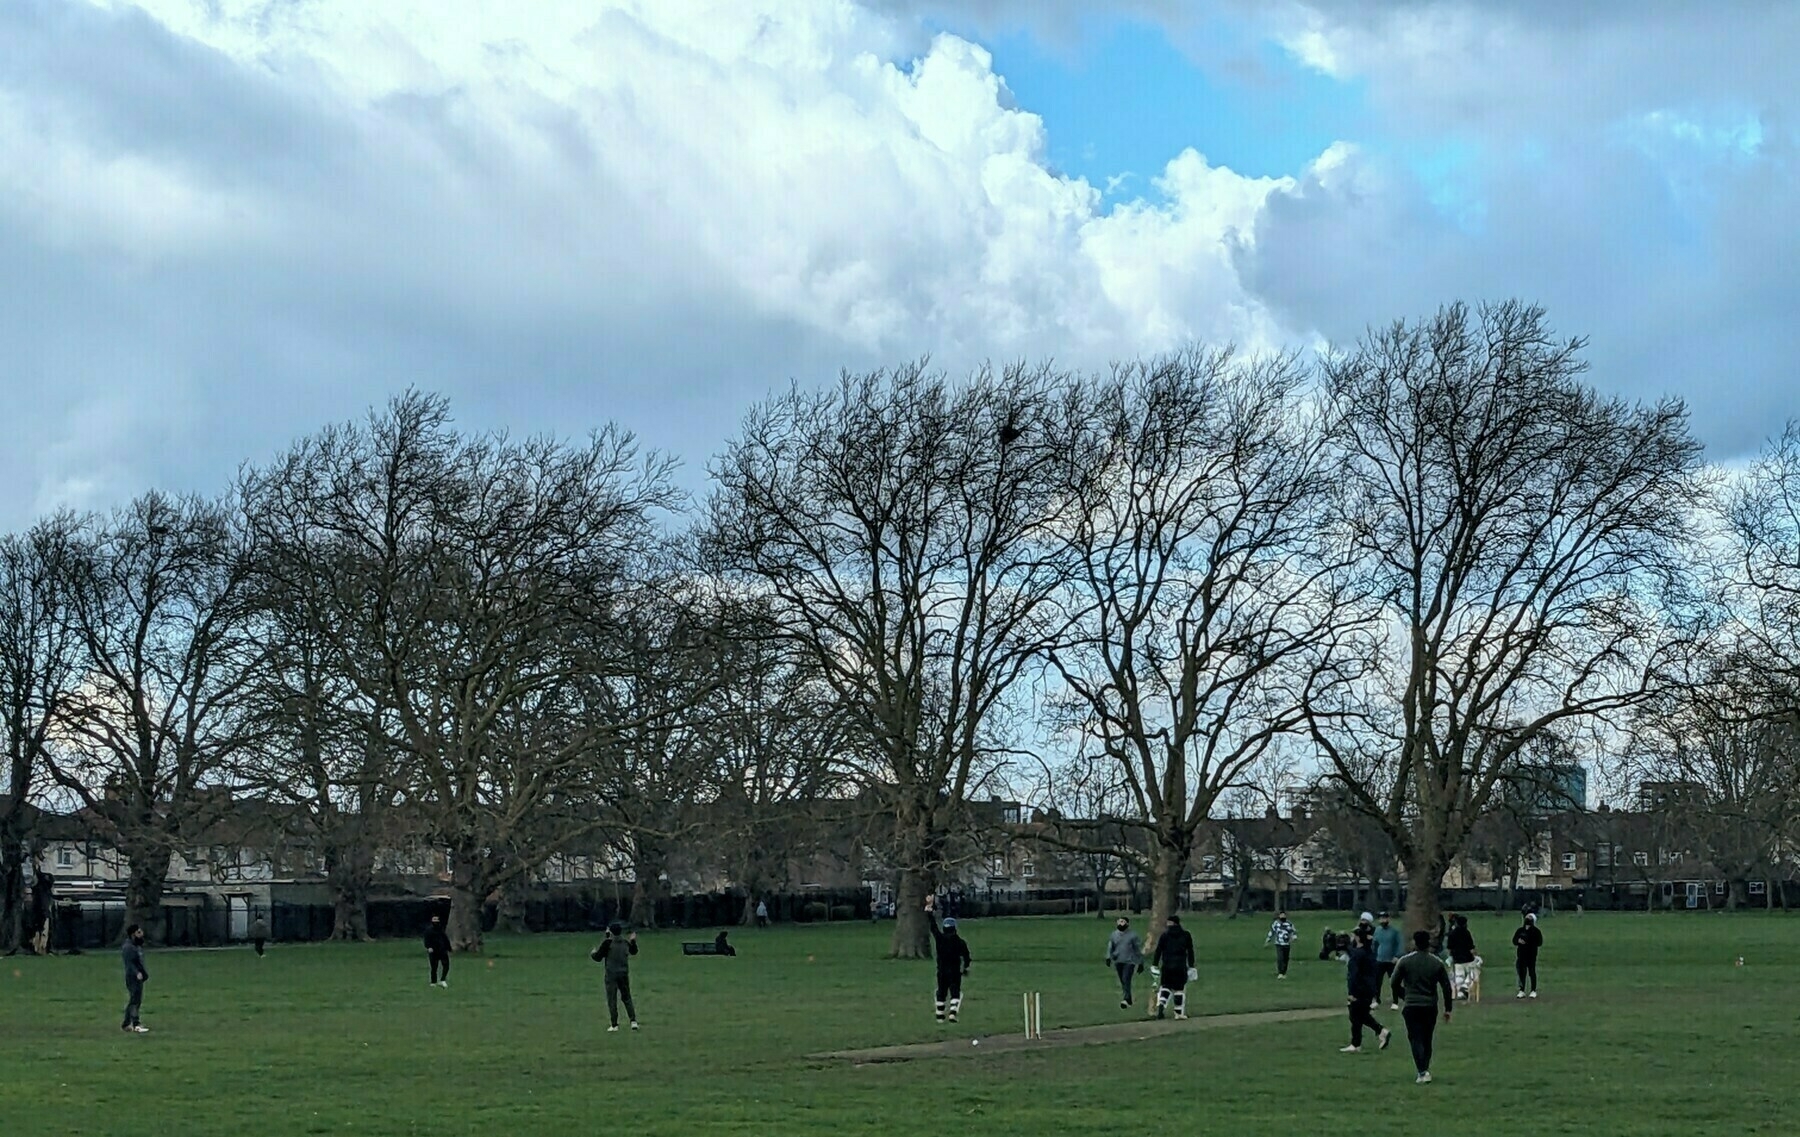 Men playing cricket in the park on a cold, wet and blustery Sunday afternoon in early February 